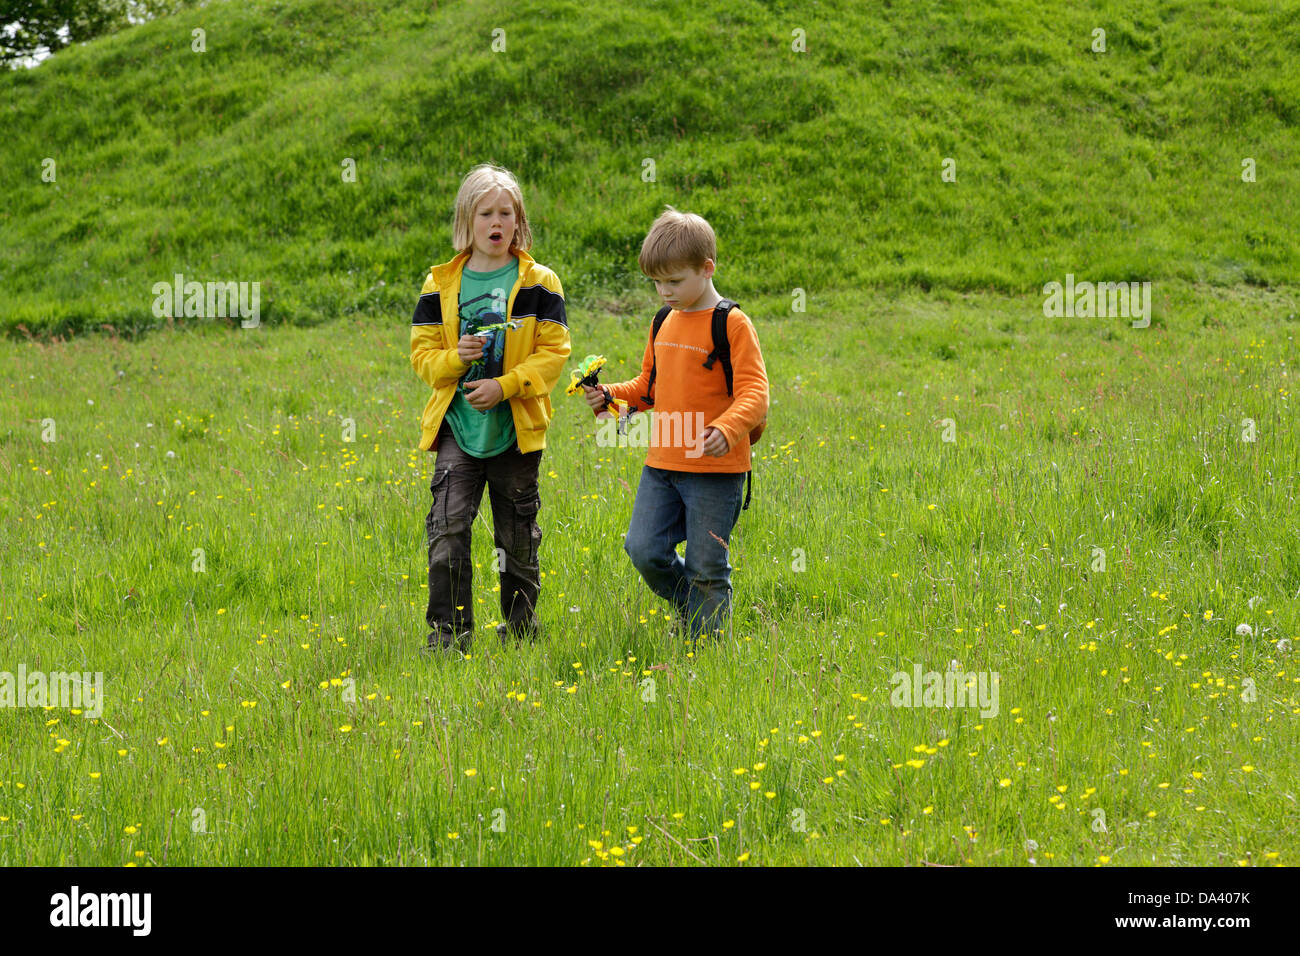 two boys together in a meadow Stock Photo